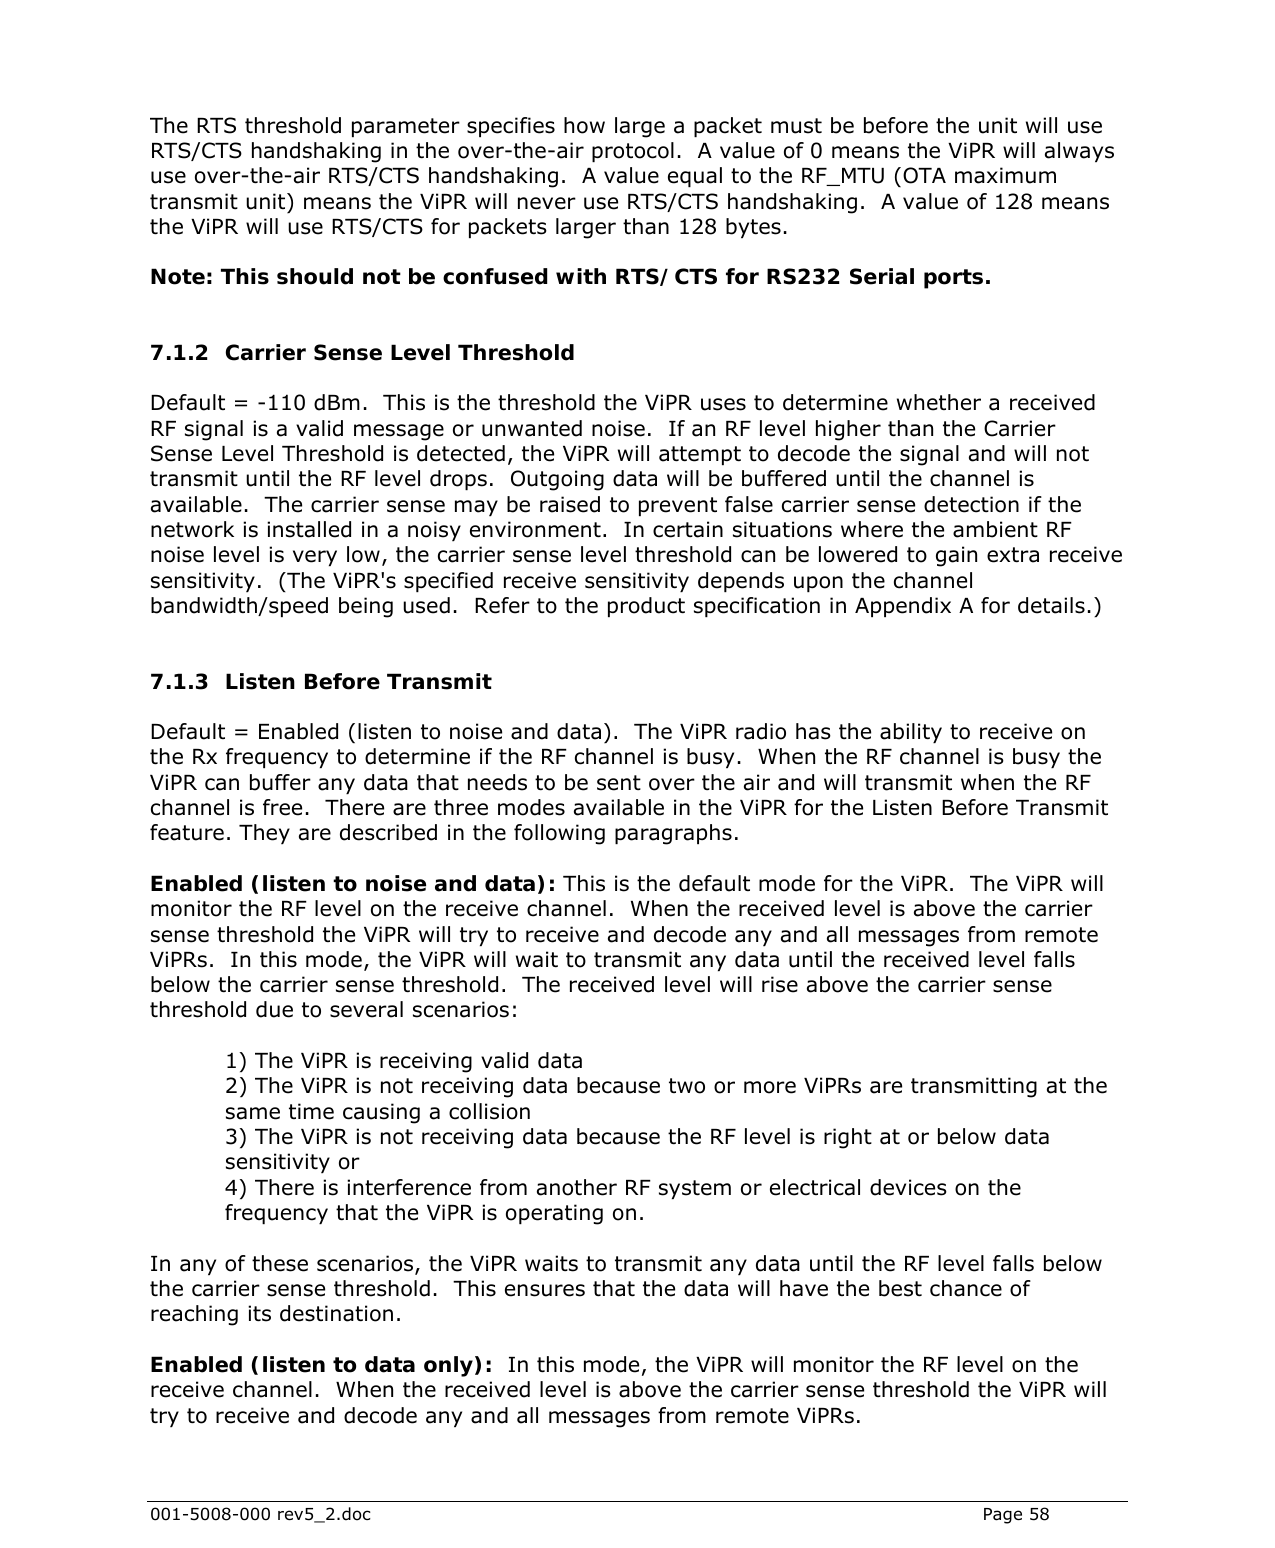  001-5008-000 rev5_2.doc    Page 58   The RTS threshold parameter specifies how large a packet must be before the unit will use RTS/CTS handshaking in the over-the-air protocol.  A value of 0 means the ViPR will always use over-the-air RTS/CTS handshaking.  A value equal to the RF_MTU (OTA maximum transmit unit) means the ViPR will never use RTS/CTS handshaking.  A value of 128 means the ViPR will use RTS/CTS for packets larger than 128 bytes.   Note: This should not be confused with RTS/CTS for RS232 Serial ports.  7.1.2 Carrier Sense Level Threshold Default = -110 dBm.  This is the threshold the ViPR uses to determine whether a received RF signal is a valid message or unwanted noise.  If an RF level higher than the Carrier Sense Level Threshold is detected, the ViPR will attempt to decode the signal and will not transmit until the RF level drops.  Outgoing data will be buffered until the channel is available.  The carrier sense may be raised to prevent false carrier sense detection if the network is installed in a noisy environment.  In certain situations where the ambient RF noise level is very low, the carrier sense level threshold can be lowered to gain extra receive sensitivity.  (The ViPR&apos;s specified receive sensitivity depends upon the channel bandwidth/speed being used.  Refer to the product specification in Appendix A for details.)   7.1.3 Listen Before Transmit Default = Enabled (listen to noise and data).  The ViPR radio has the ability to receive on the Rx frequency to determine if the RF channel is busy.  When the RF channel is busy the ViPR can buffer any data that needs to be sent over the air and will transmit when the RF channel is free.  There are three modes available in the ViPR for the Listen Before Transmit feature. They are described in the following paragraphs.   Enabled (listen to noise and data): This is the default mode for the ViPR.  The ViPR will monitor the RF level on the receive channel.  When the received level is above the carrier sense threshold the ViPR will try to receive and decode any and all messages from remote ViPRs.  In this mode, the ViPR will wait to transmit any data until the received level falls below the carrier sense threshold.  The received level will rise above the carrier sense threshold due to several scenarios:   1) The ViPR is receiving valid data  2) The ViPR is not receiving data because two or more ViPRs are transmitting at the same time causing a collision  3) The ViPR is not receiving data because the RF level is right at or below data sensitivity or  4) There is interference from another RF system or electrical devices on the frequency that the ViPR is operating on.   In any of these scenarios, the ViPR waits to transmit any data until the RF level falls below the carrier sense threshold.  This ensures that the data will have the best chance of reaching its destination.  Enabled (listen to data only):  In this mode, the ViPR will monitor the RF level on the receive channel.  When the received level is above the carrier sense threshold the ViPR will try to receive and decode any and all messages from remote ViPRs.   